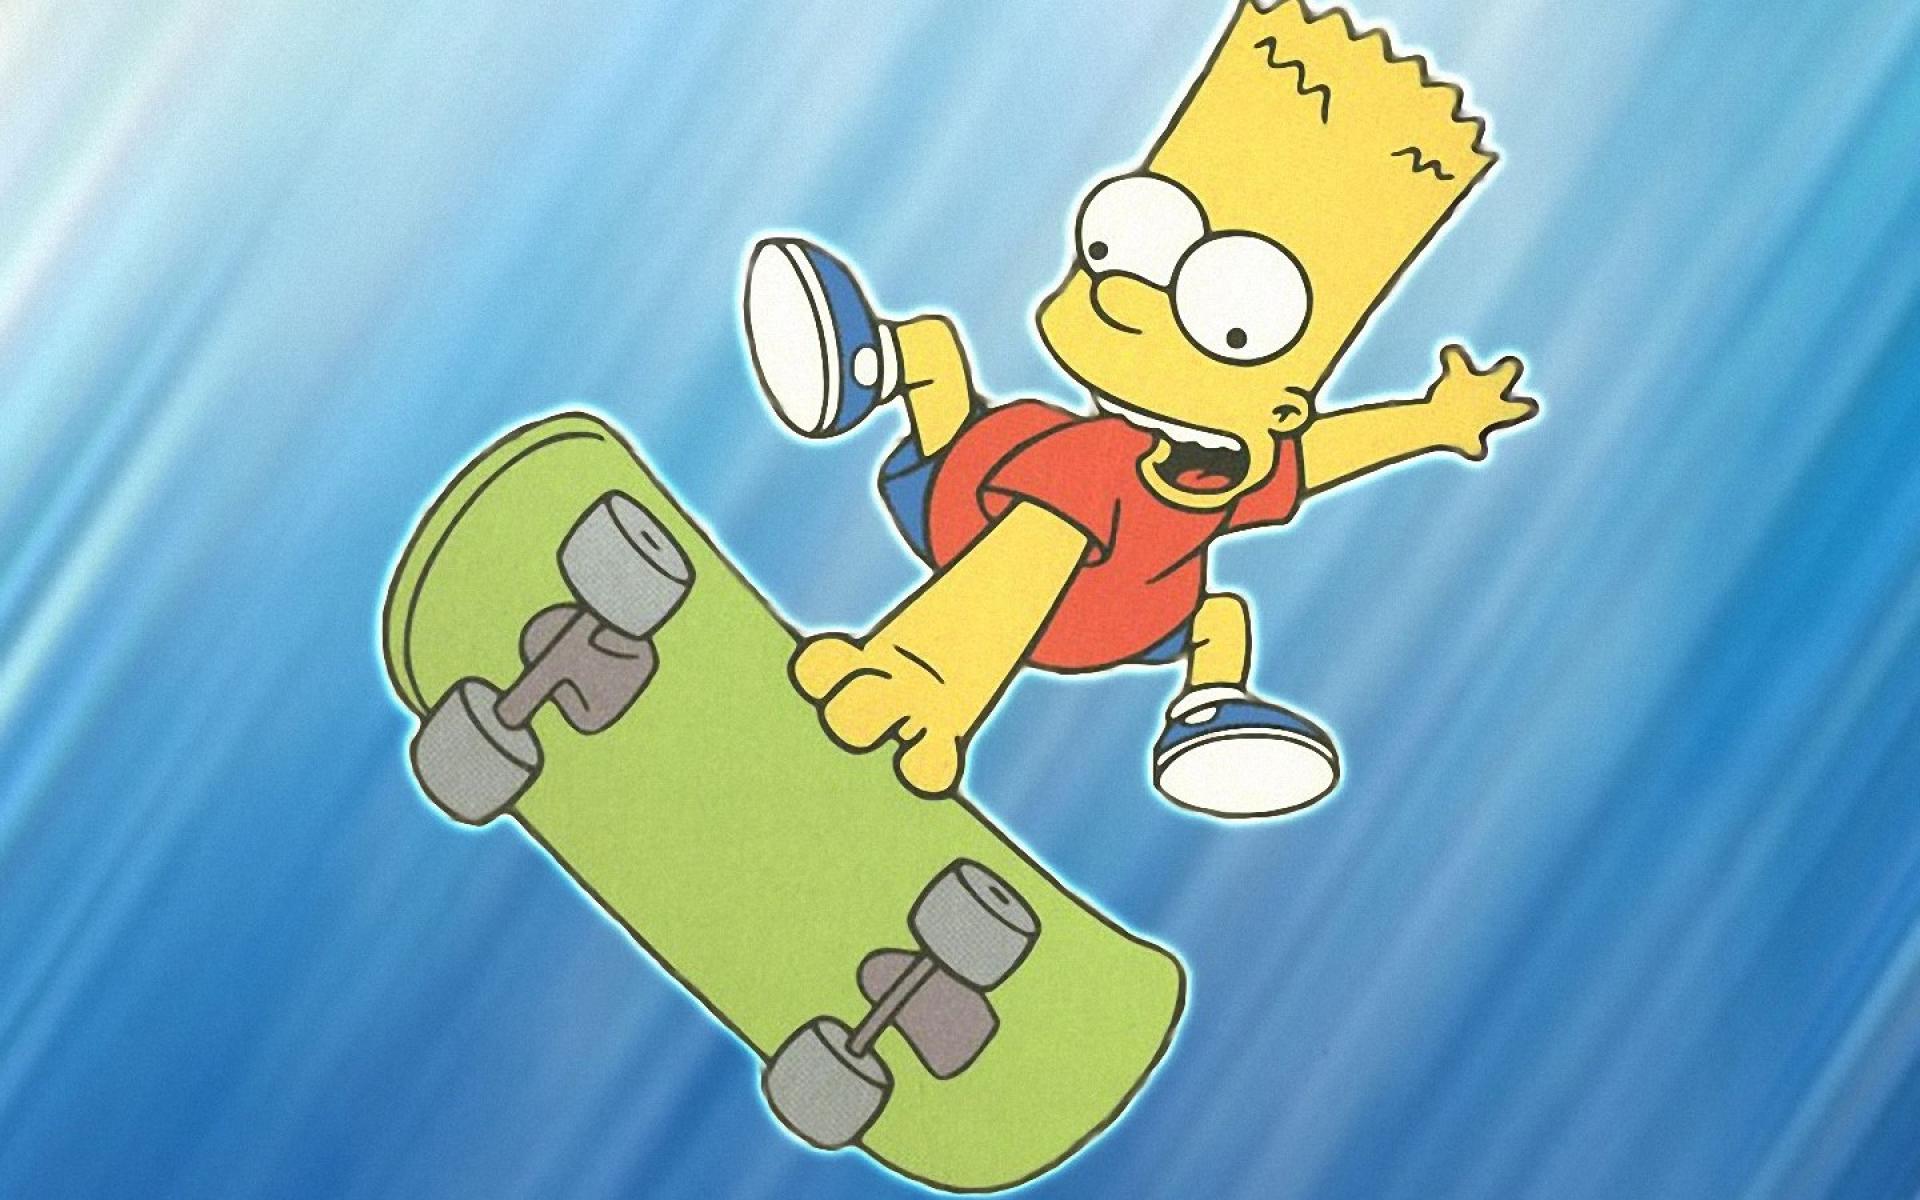 Bart Simpson Wallpapers   Wallpaper High Definition High Quality 1920x1200